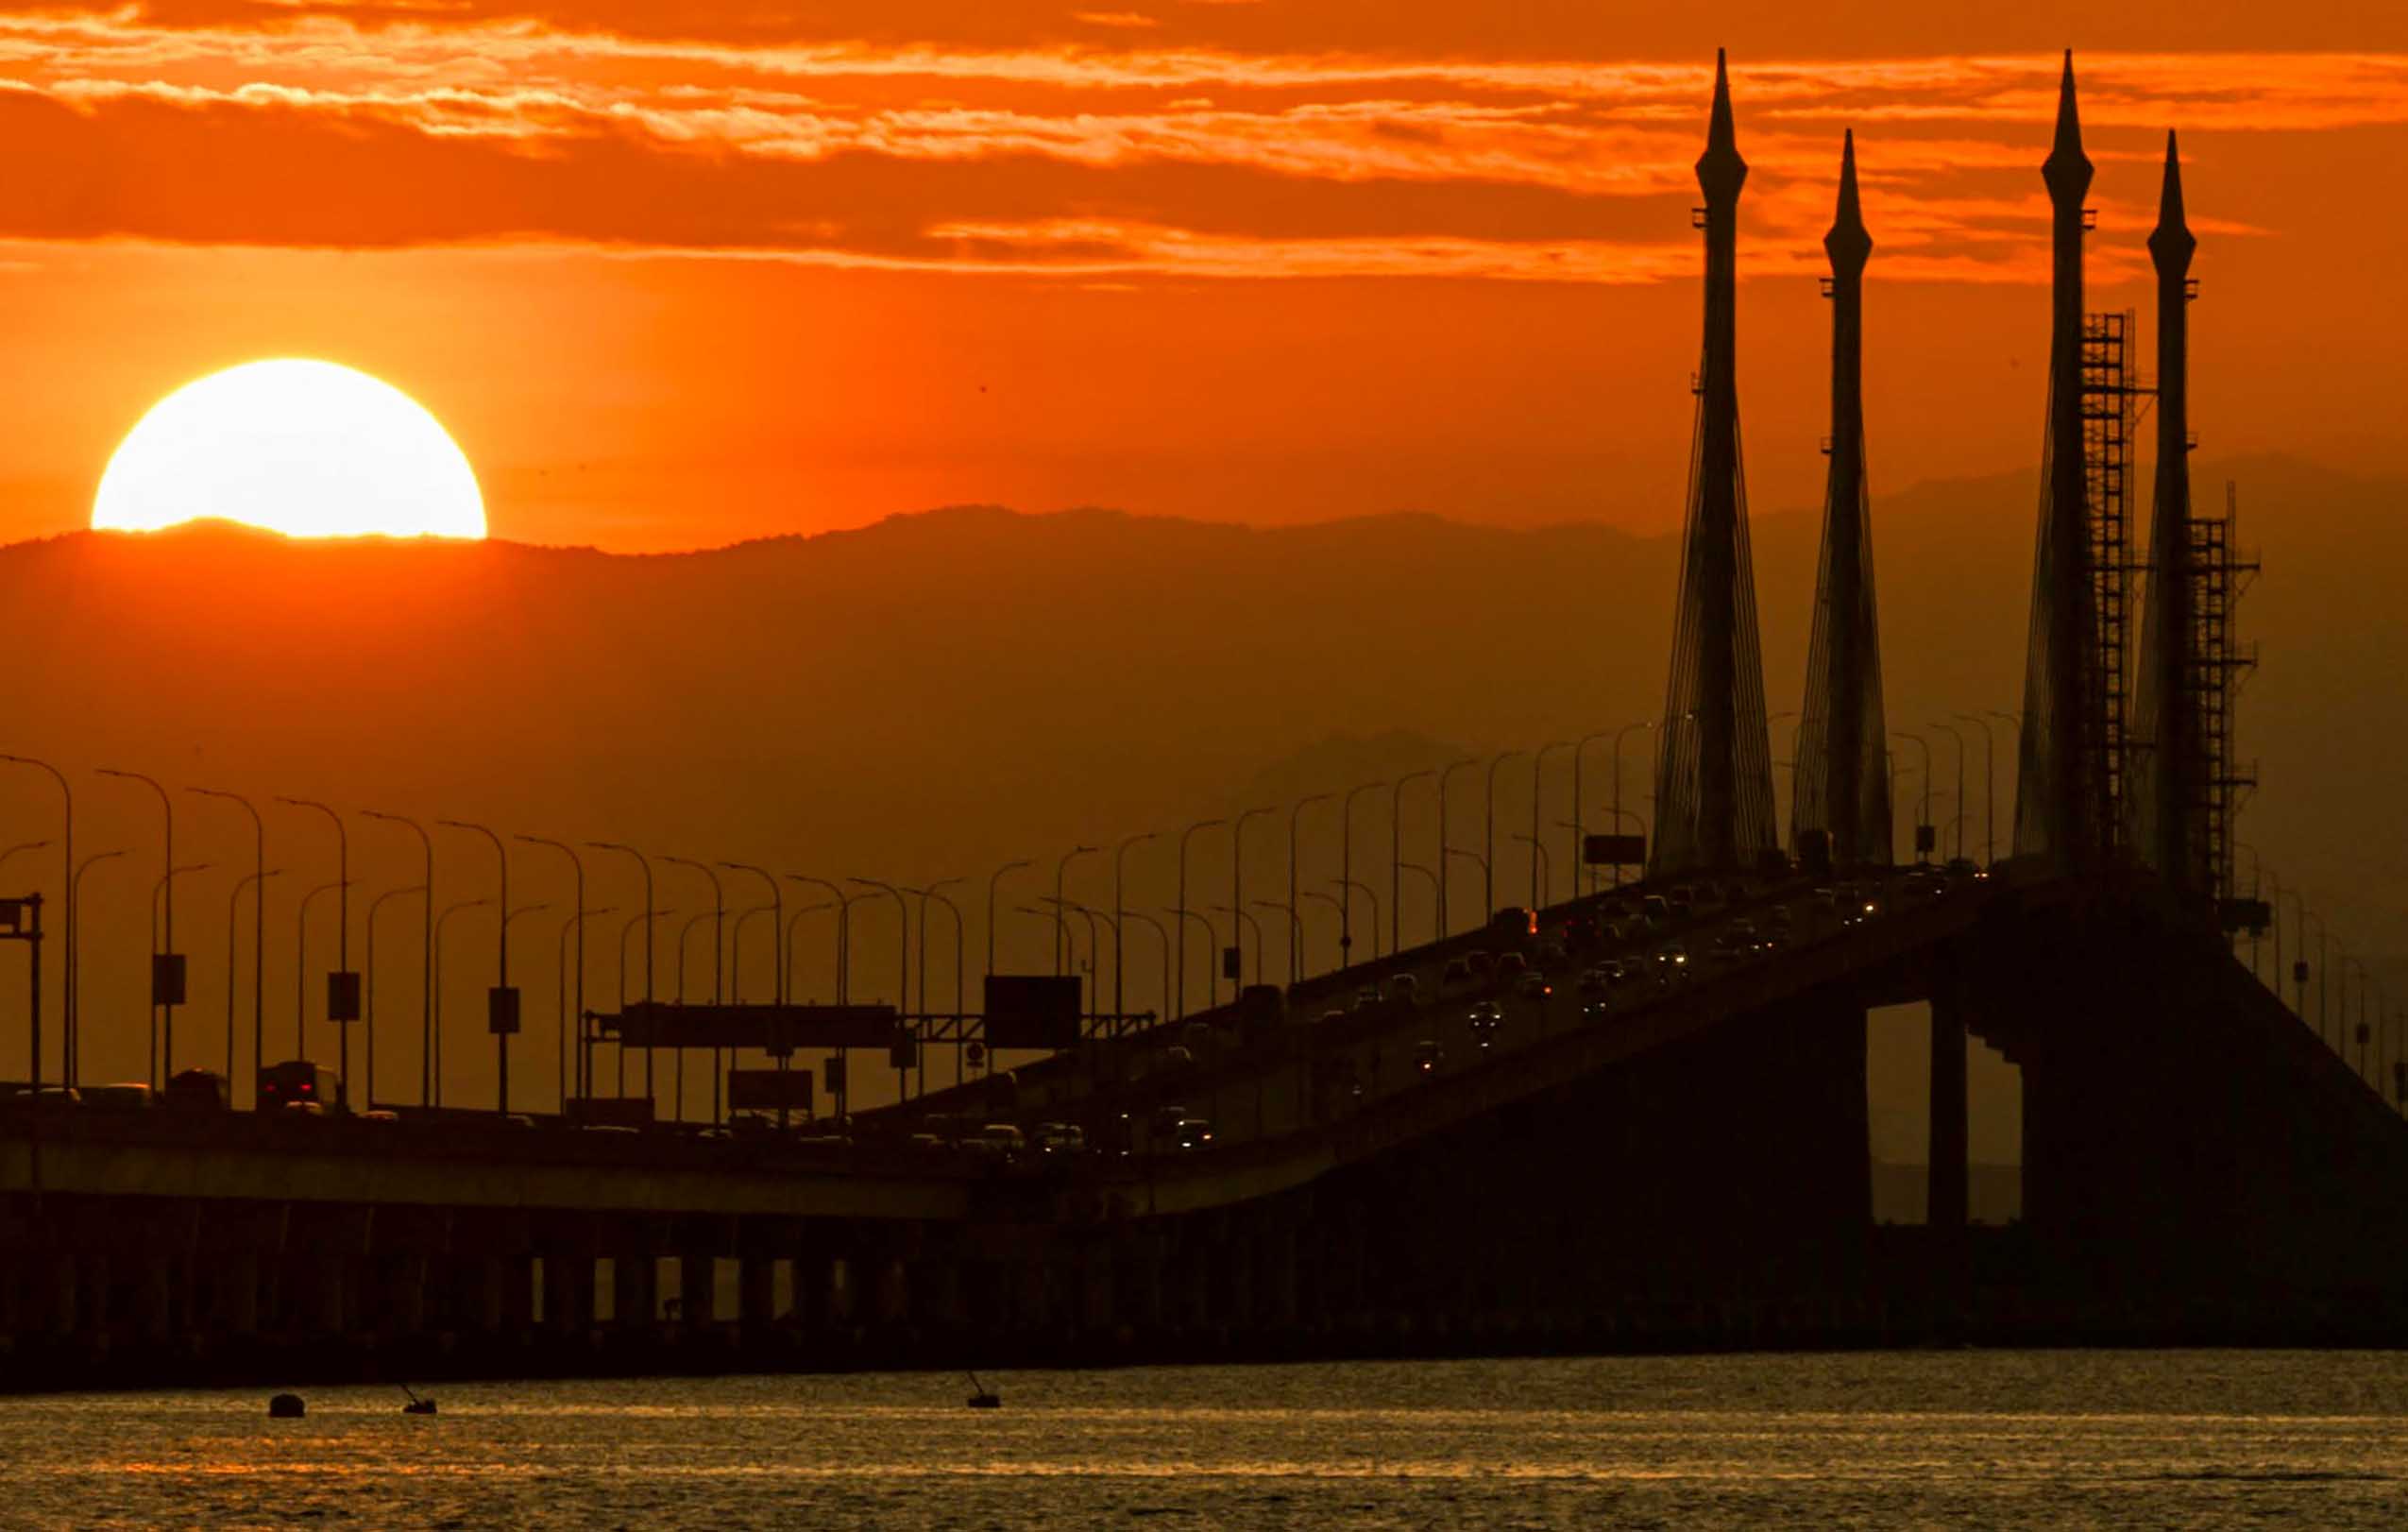 The sun rises as motorists cross over the Penang Bridge in George Town on Malaysia's Penang Island on March 11, 2023. (Photo by Mohd RASFAN / AFP)